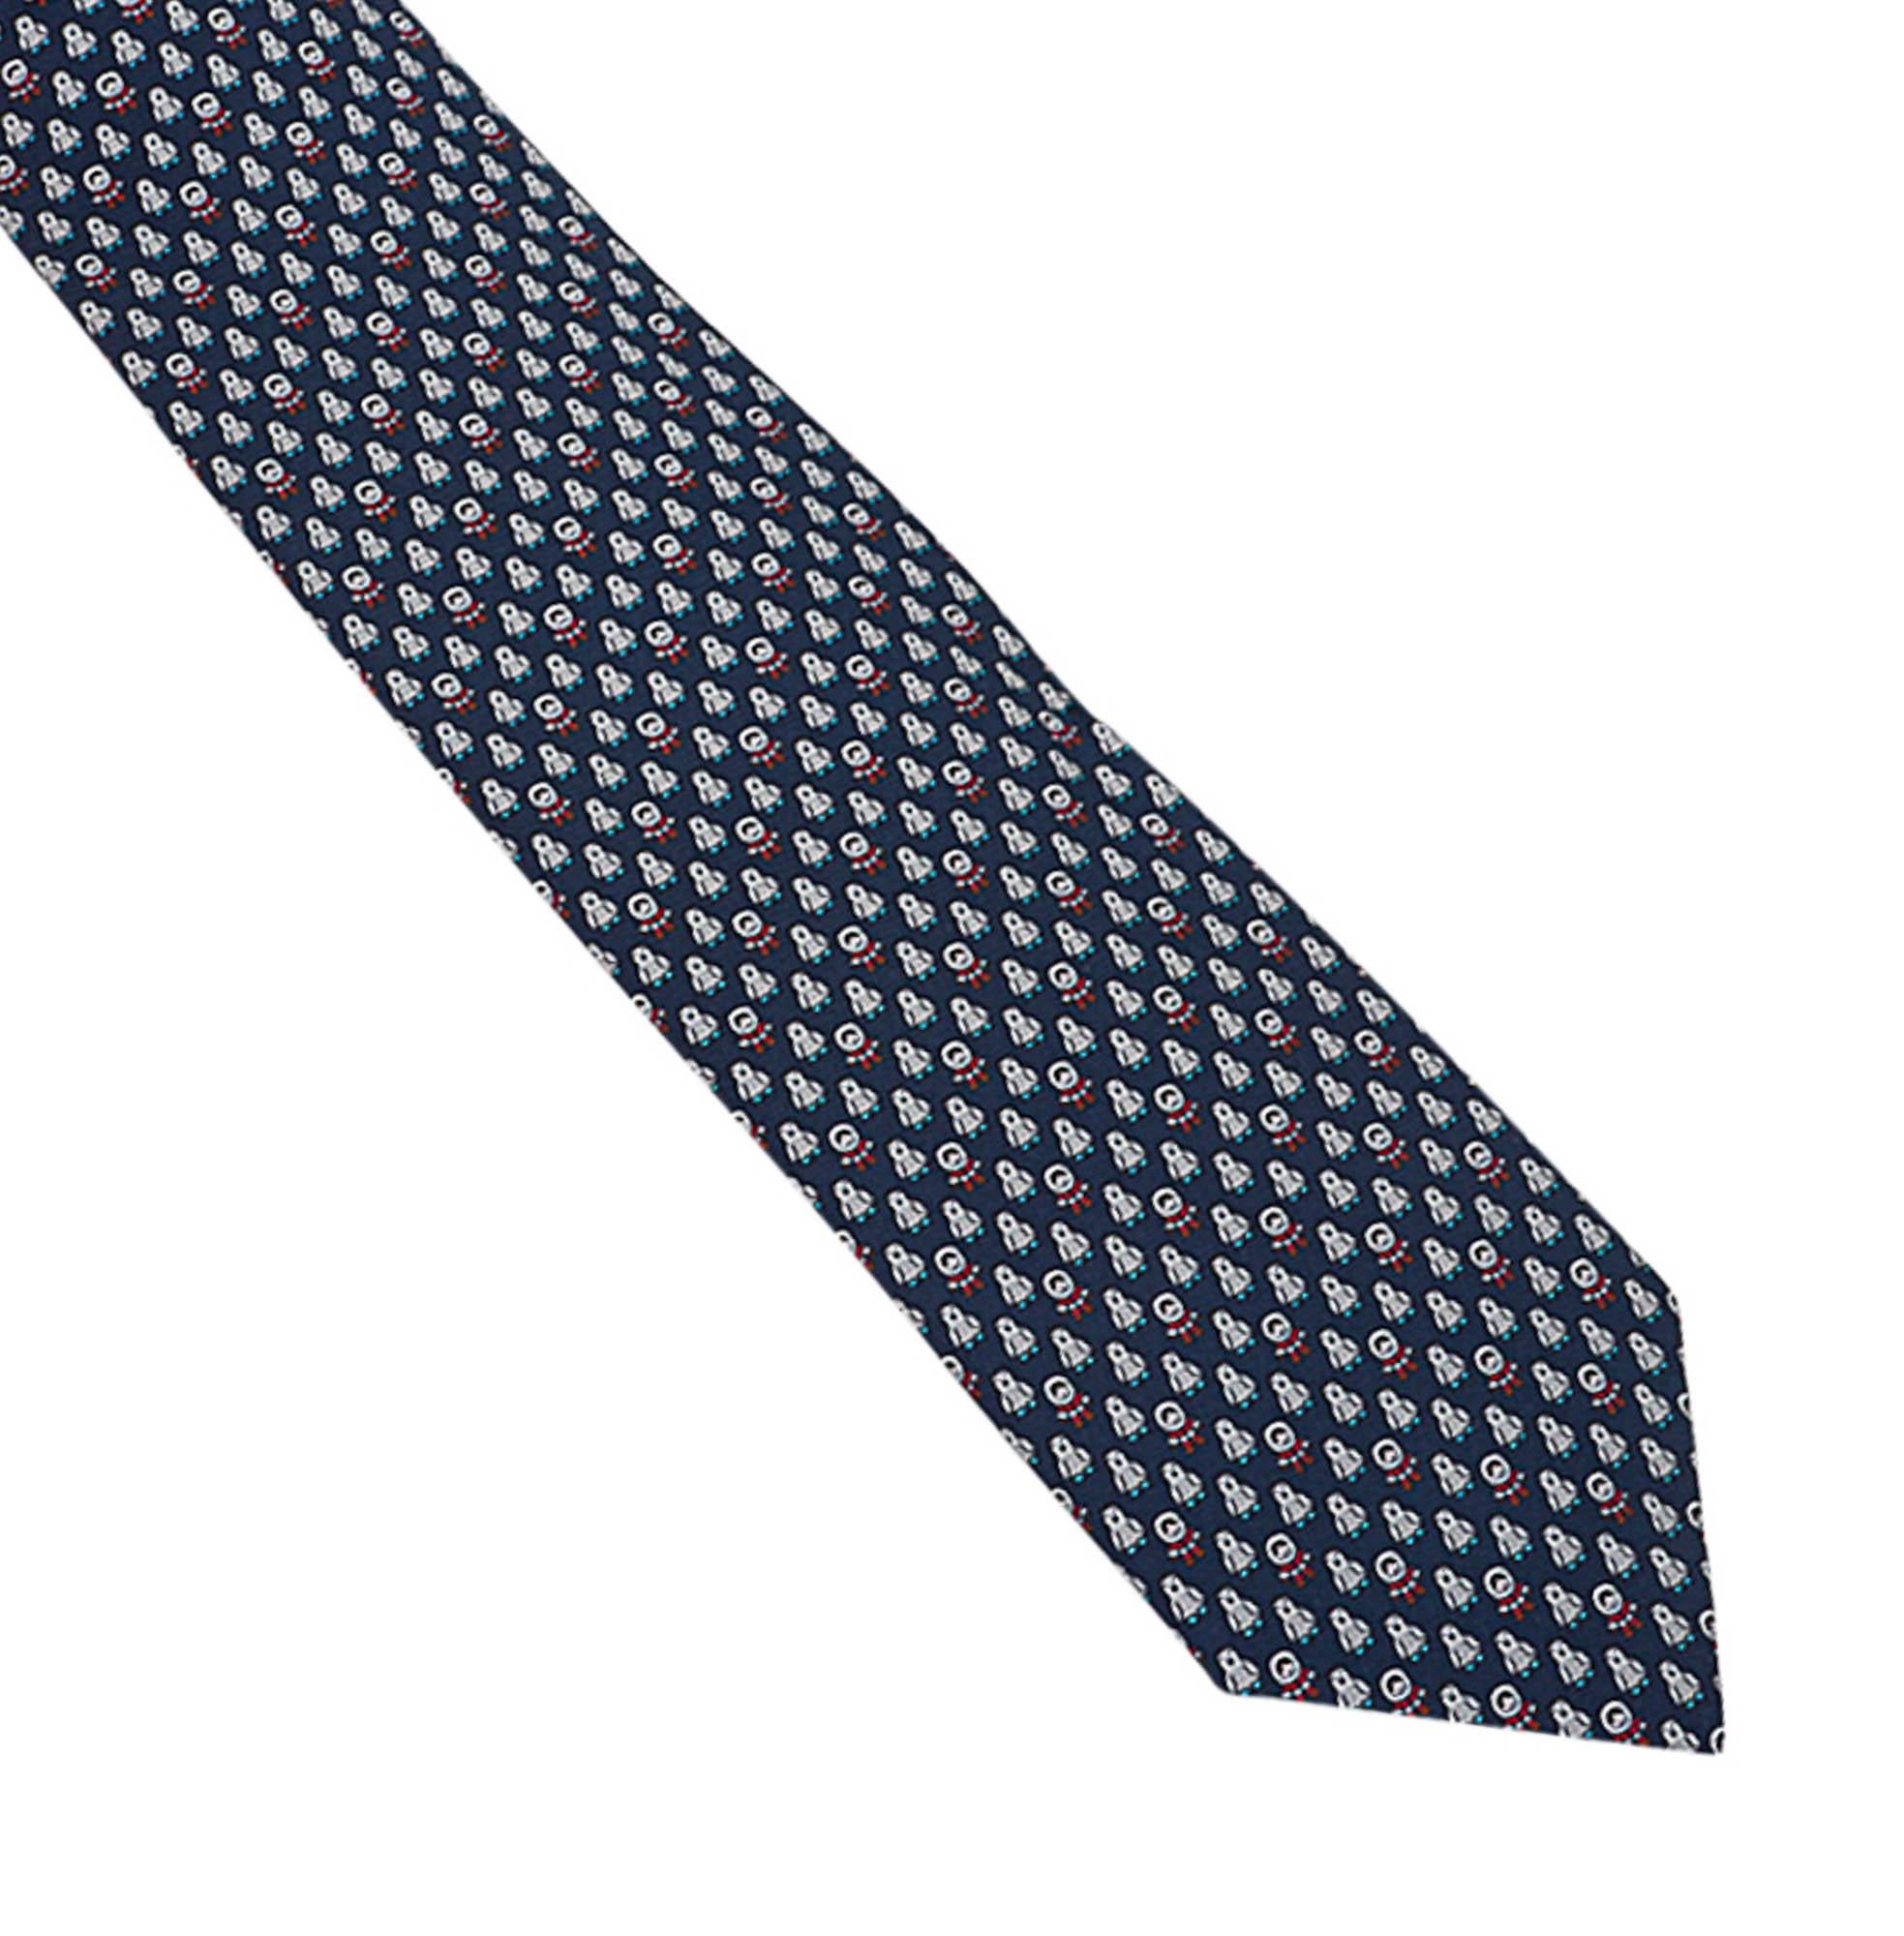 Mightychic offers an Hermes Pingloo Twillbi silk tie featured in Marine and Rouge.
Charming Inuit and Penguins adorn the front.
The inner has small foot steps along the length.
The interior hides an igloo!
This delightful piece is a perfect addition